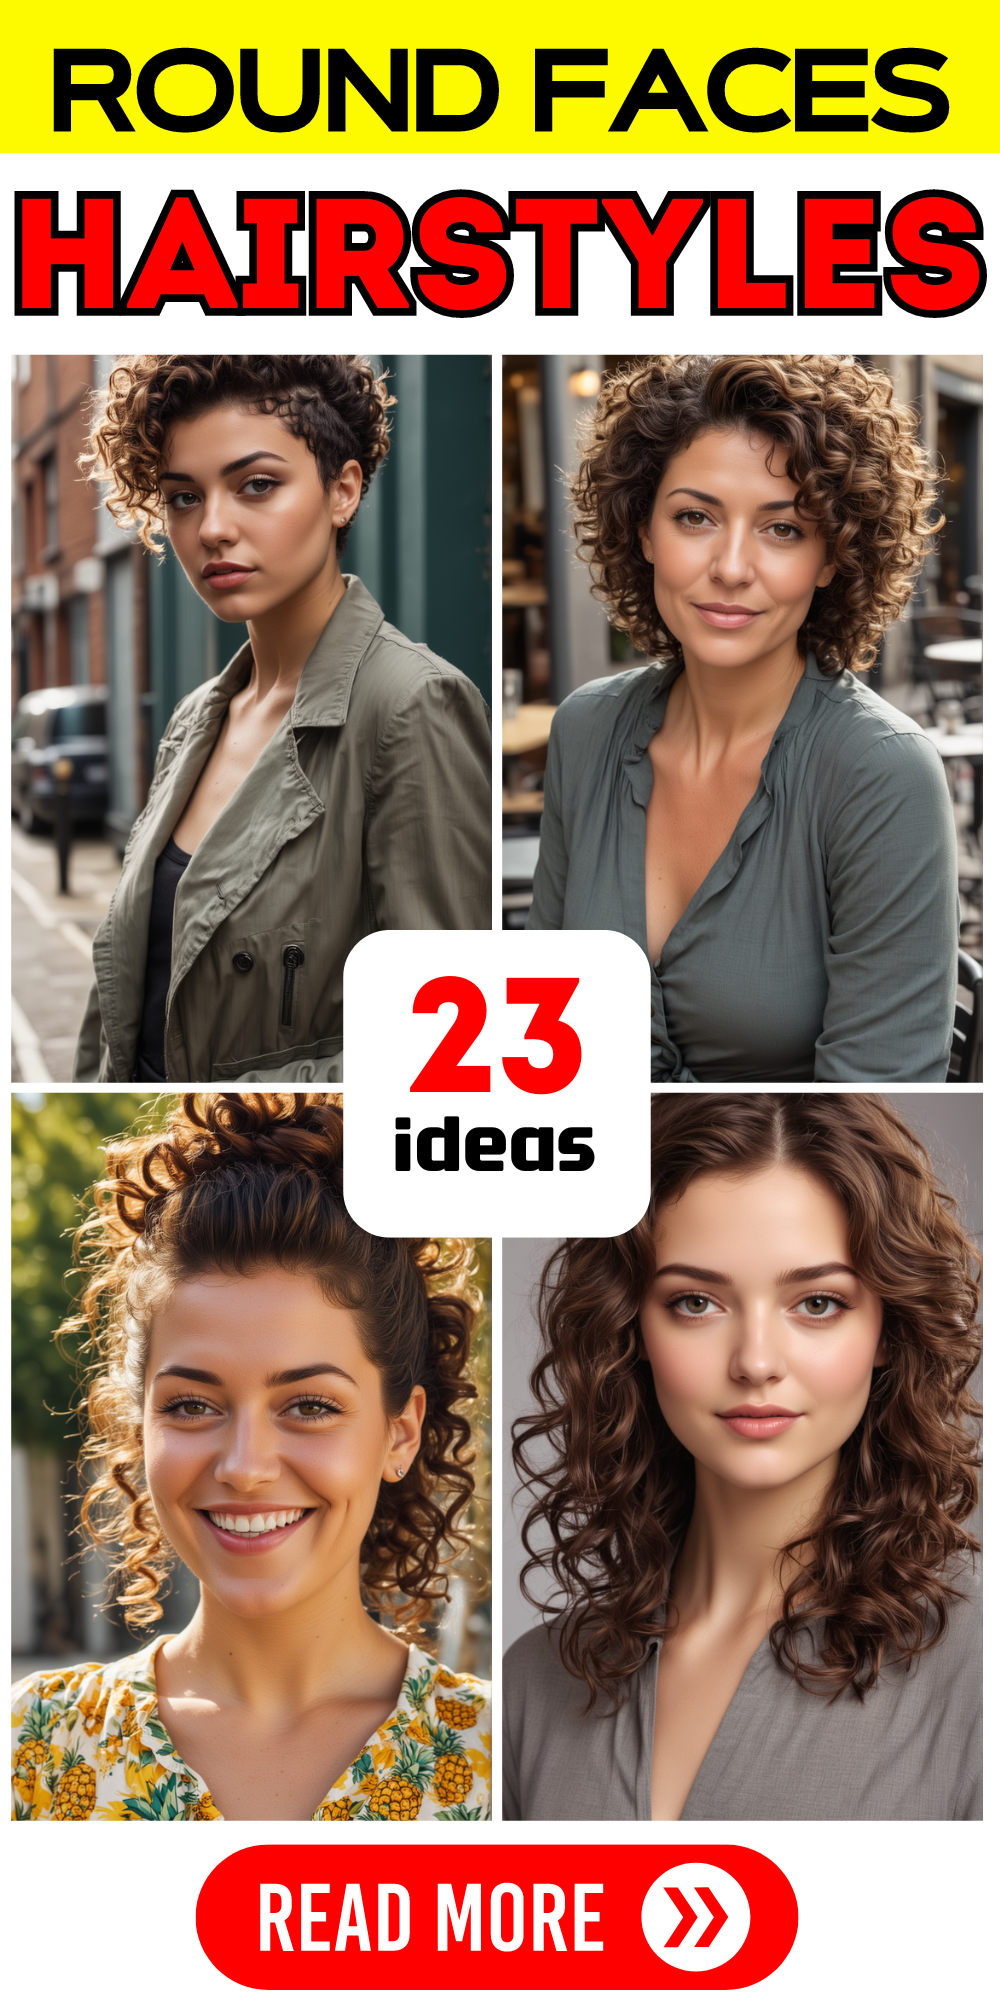 23 Chic Short Curly Weave Hairstyles for Round Faces with Double Chin